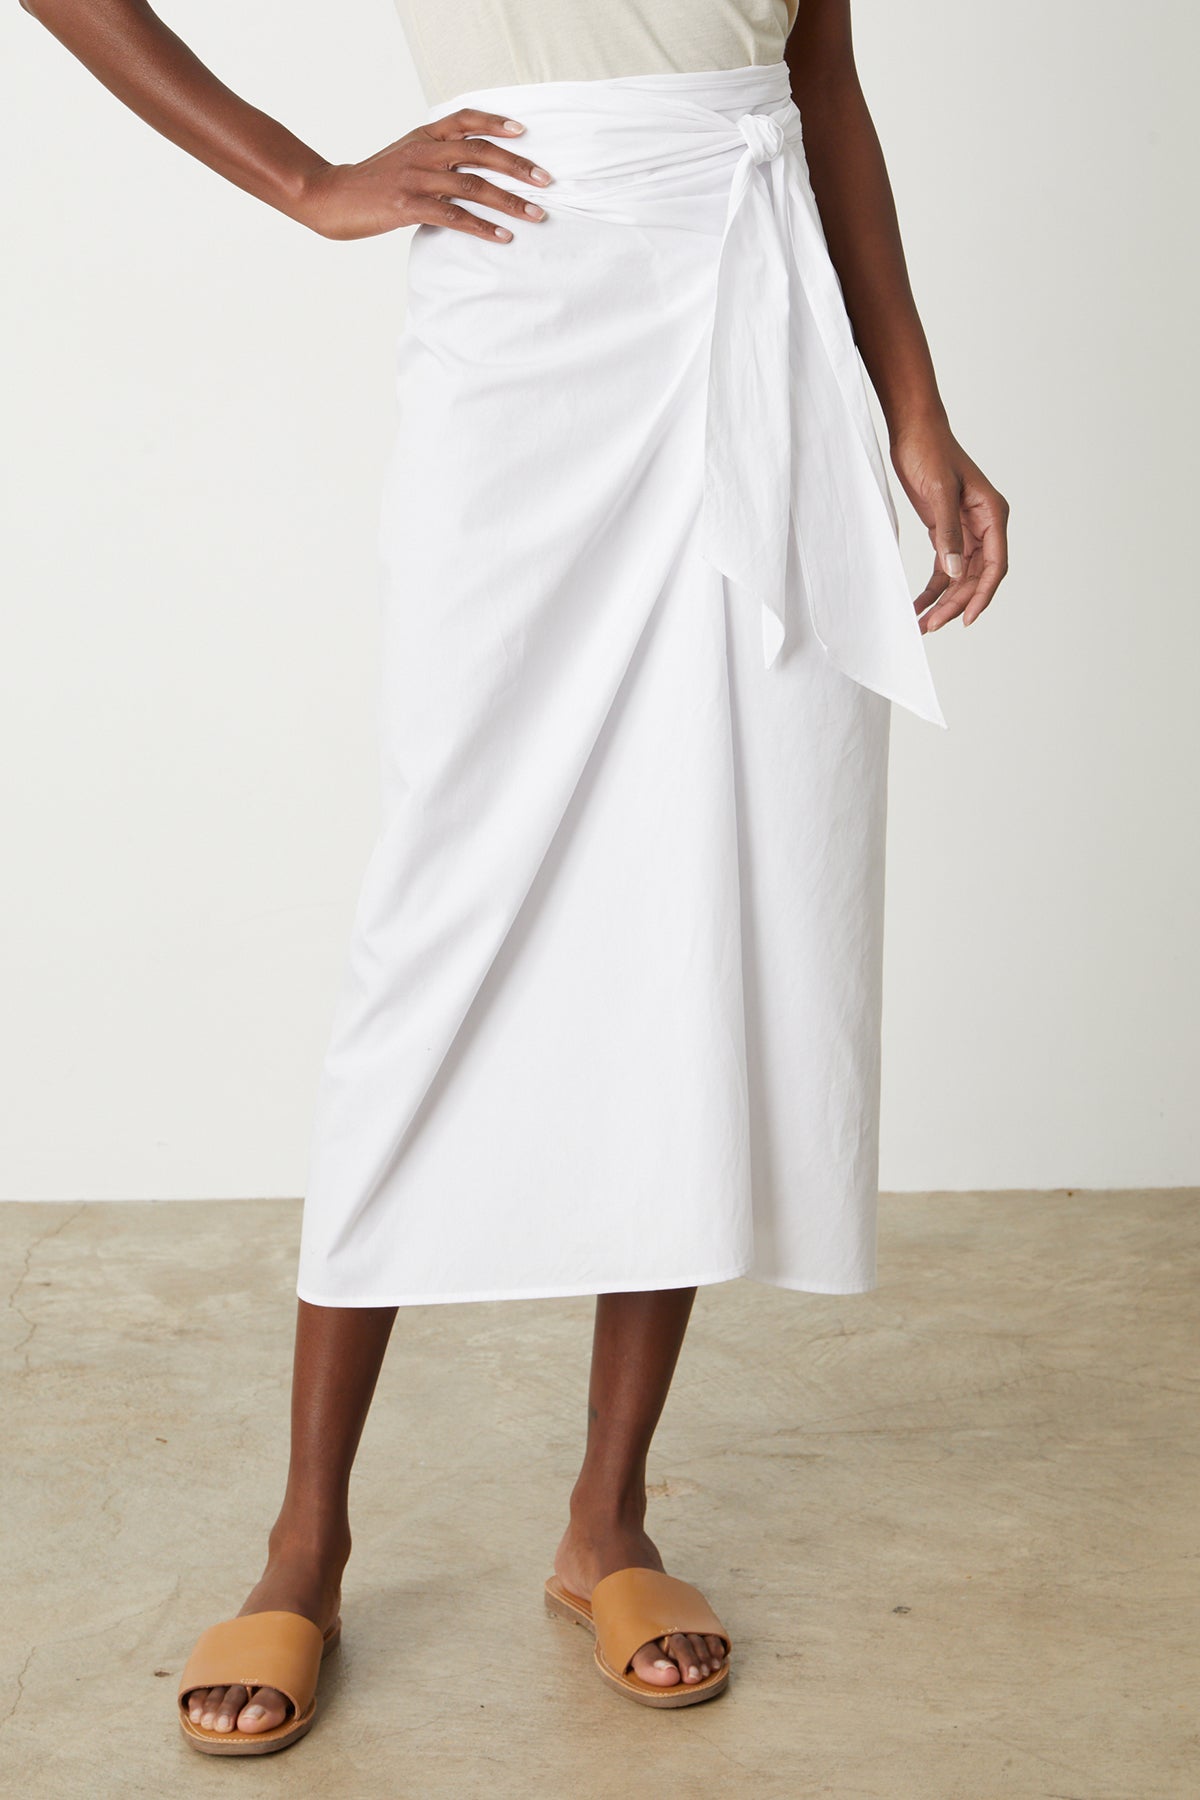 Leena Skirt with tie in front white front-26296071618753